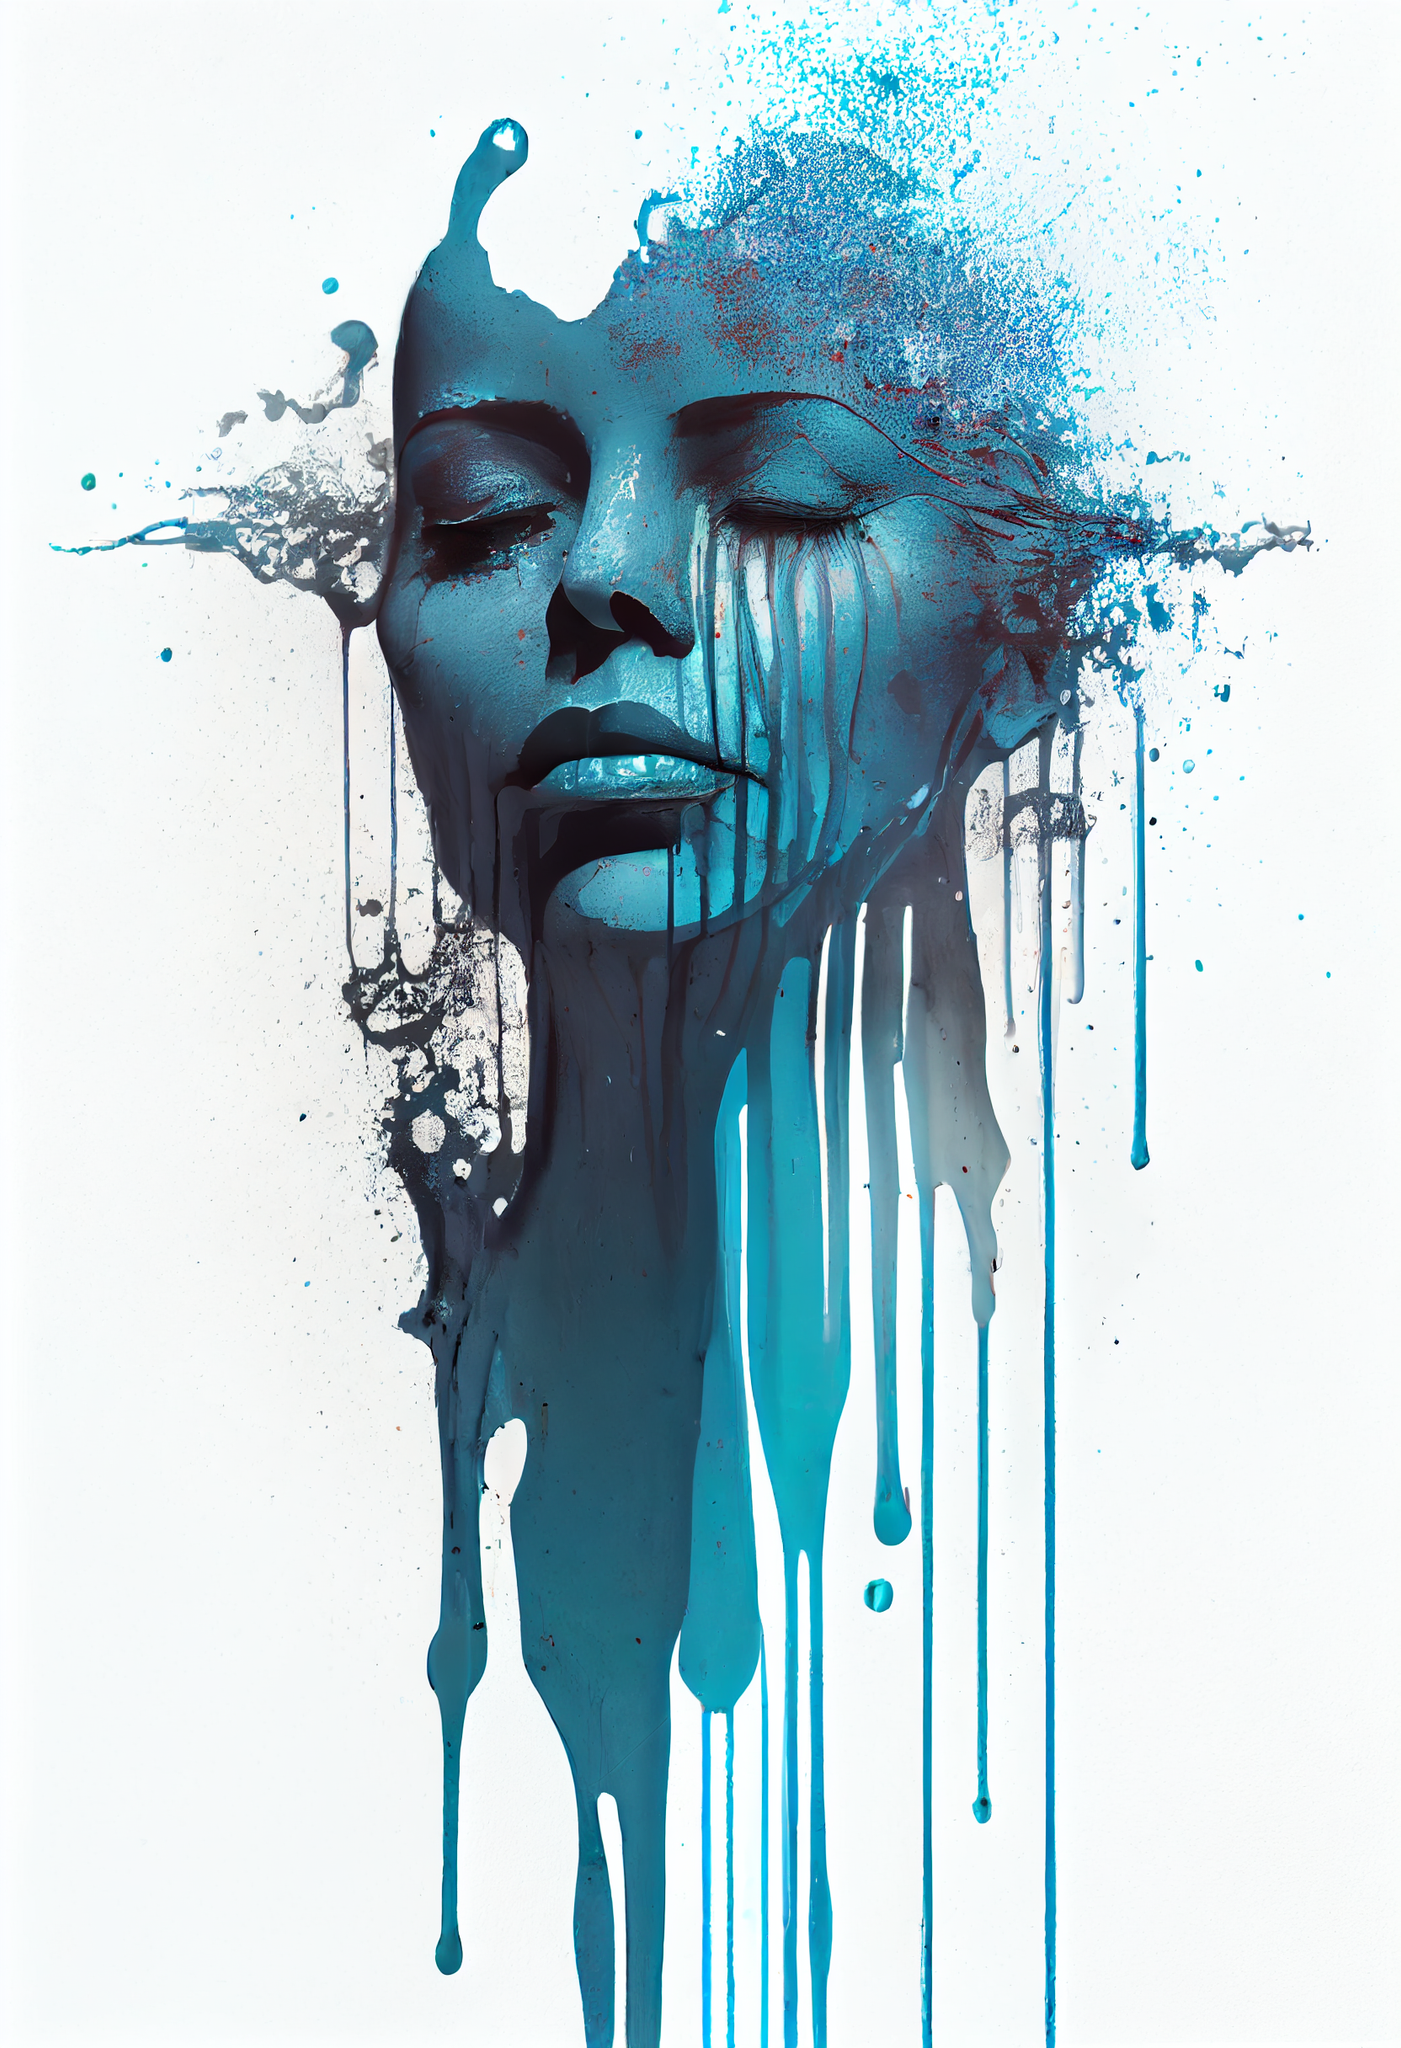 Abstract Face of a Woman in Dripping Paint Style: A Vibrant and Expressive Art Print